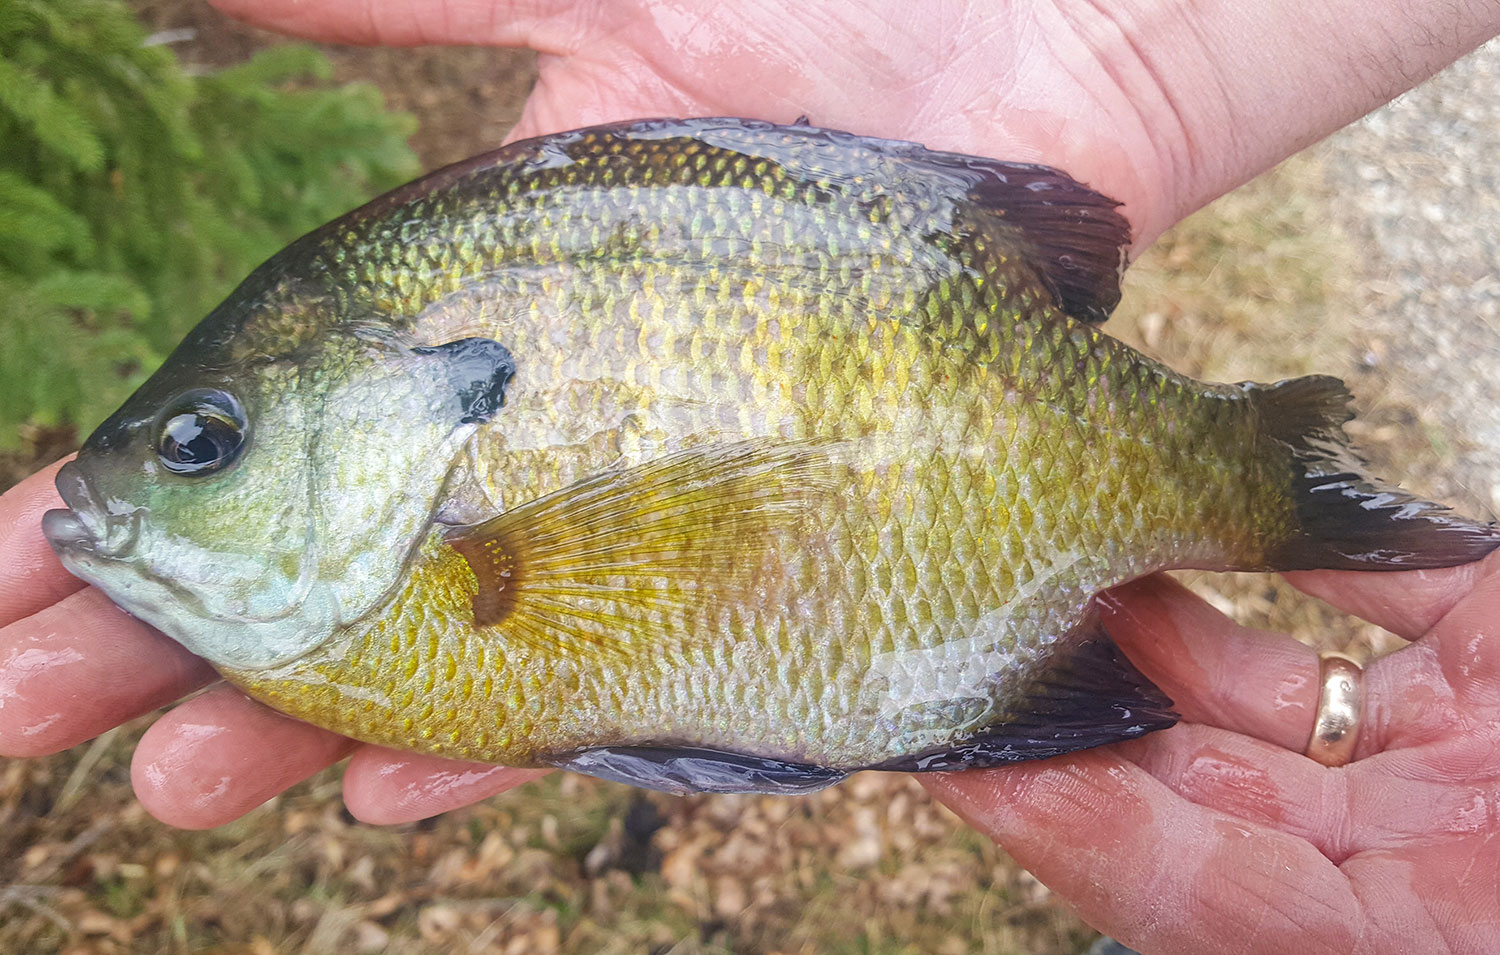 Bluegill fishing: How and where to catch the popular fish species